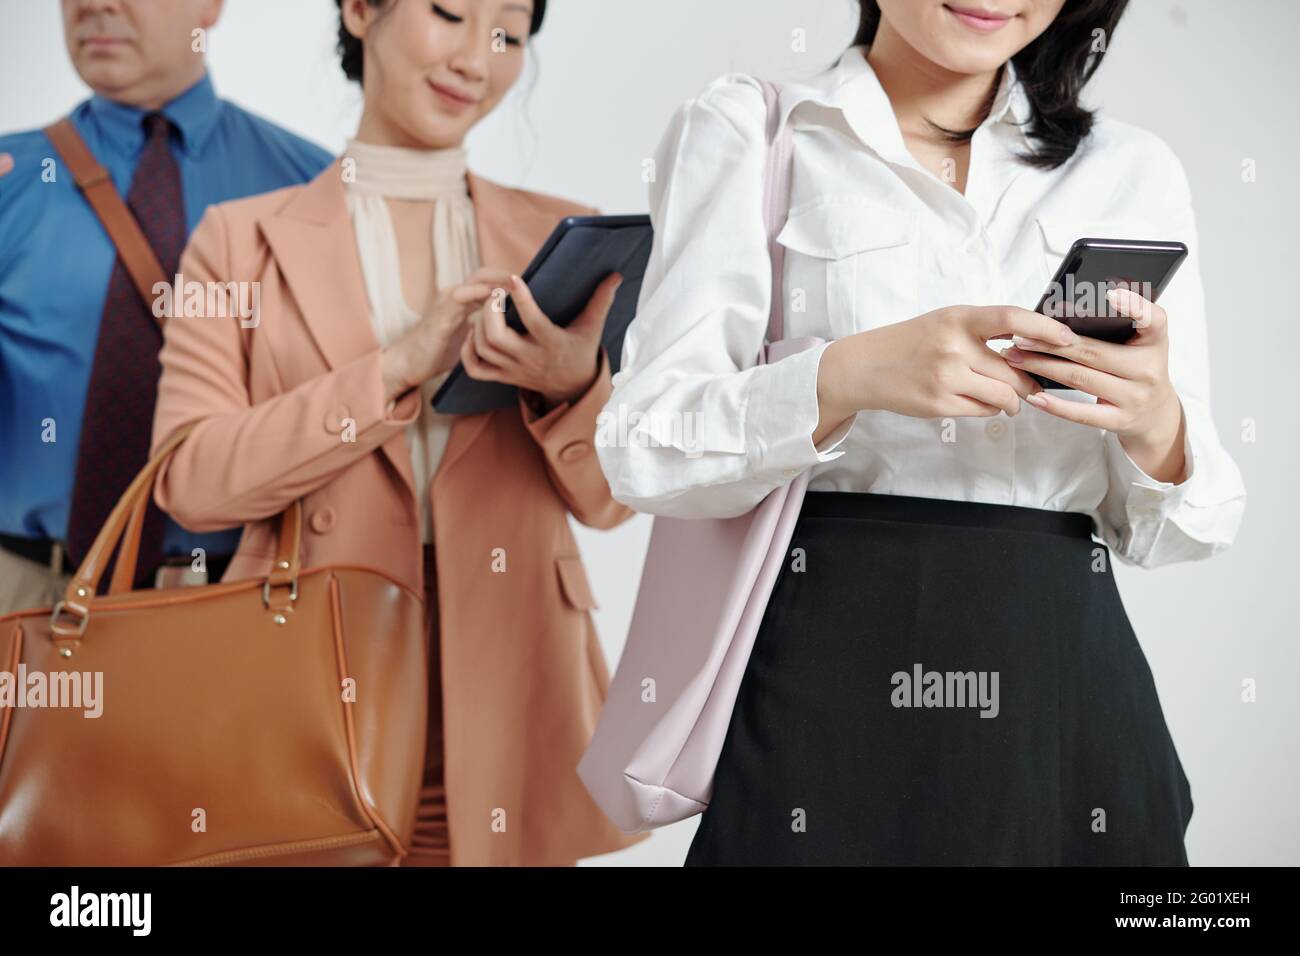 Cropped image of business people standing in queue and using mobile applications on smartphones Stock Photo